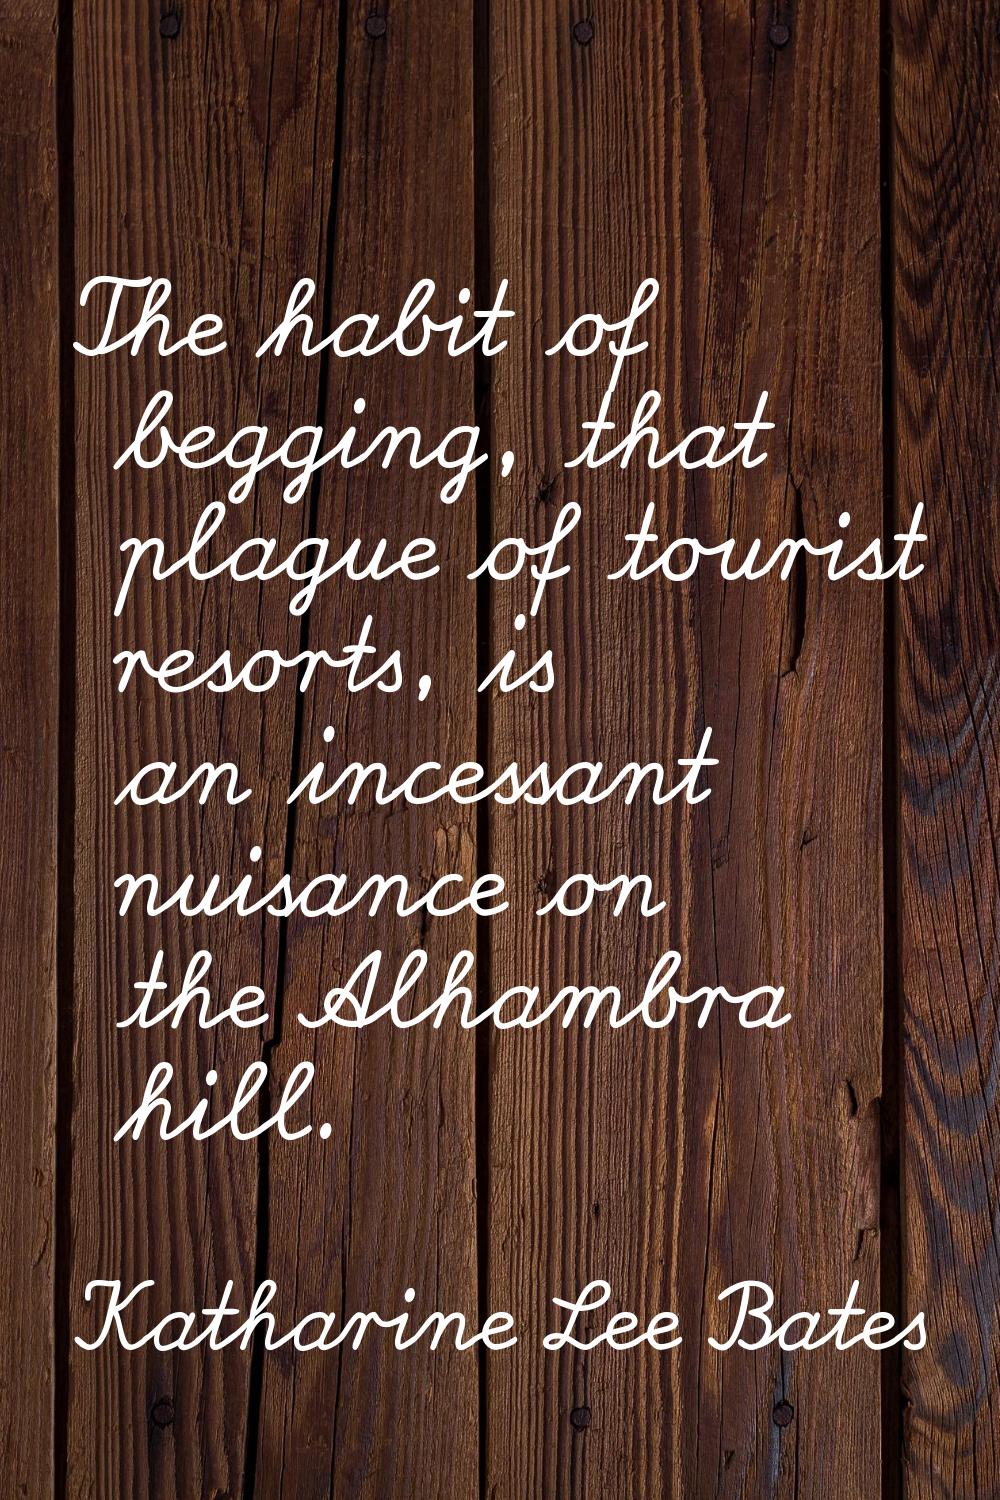 The habit of begging, that plague of tourist resorts, is an incessant nuisance on the Alhambra hill